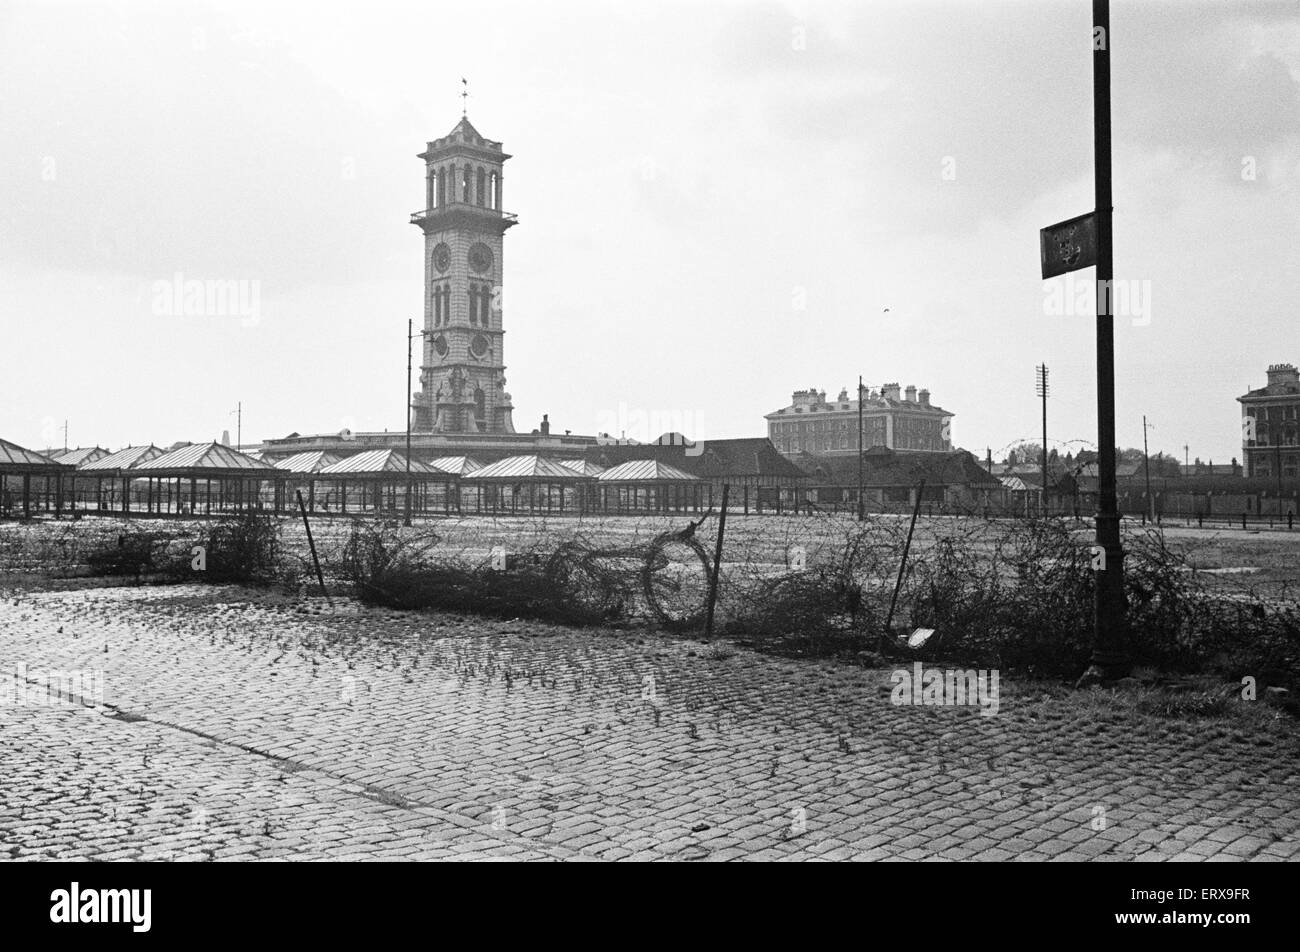 Caledonian Market, just off the Caledonian Road in Islington, London. Built by the City of London Corporation and was opened in June 1855 by Prince Albert. July 1946. Stock Photo